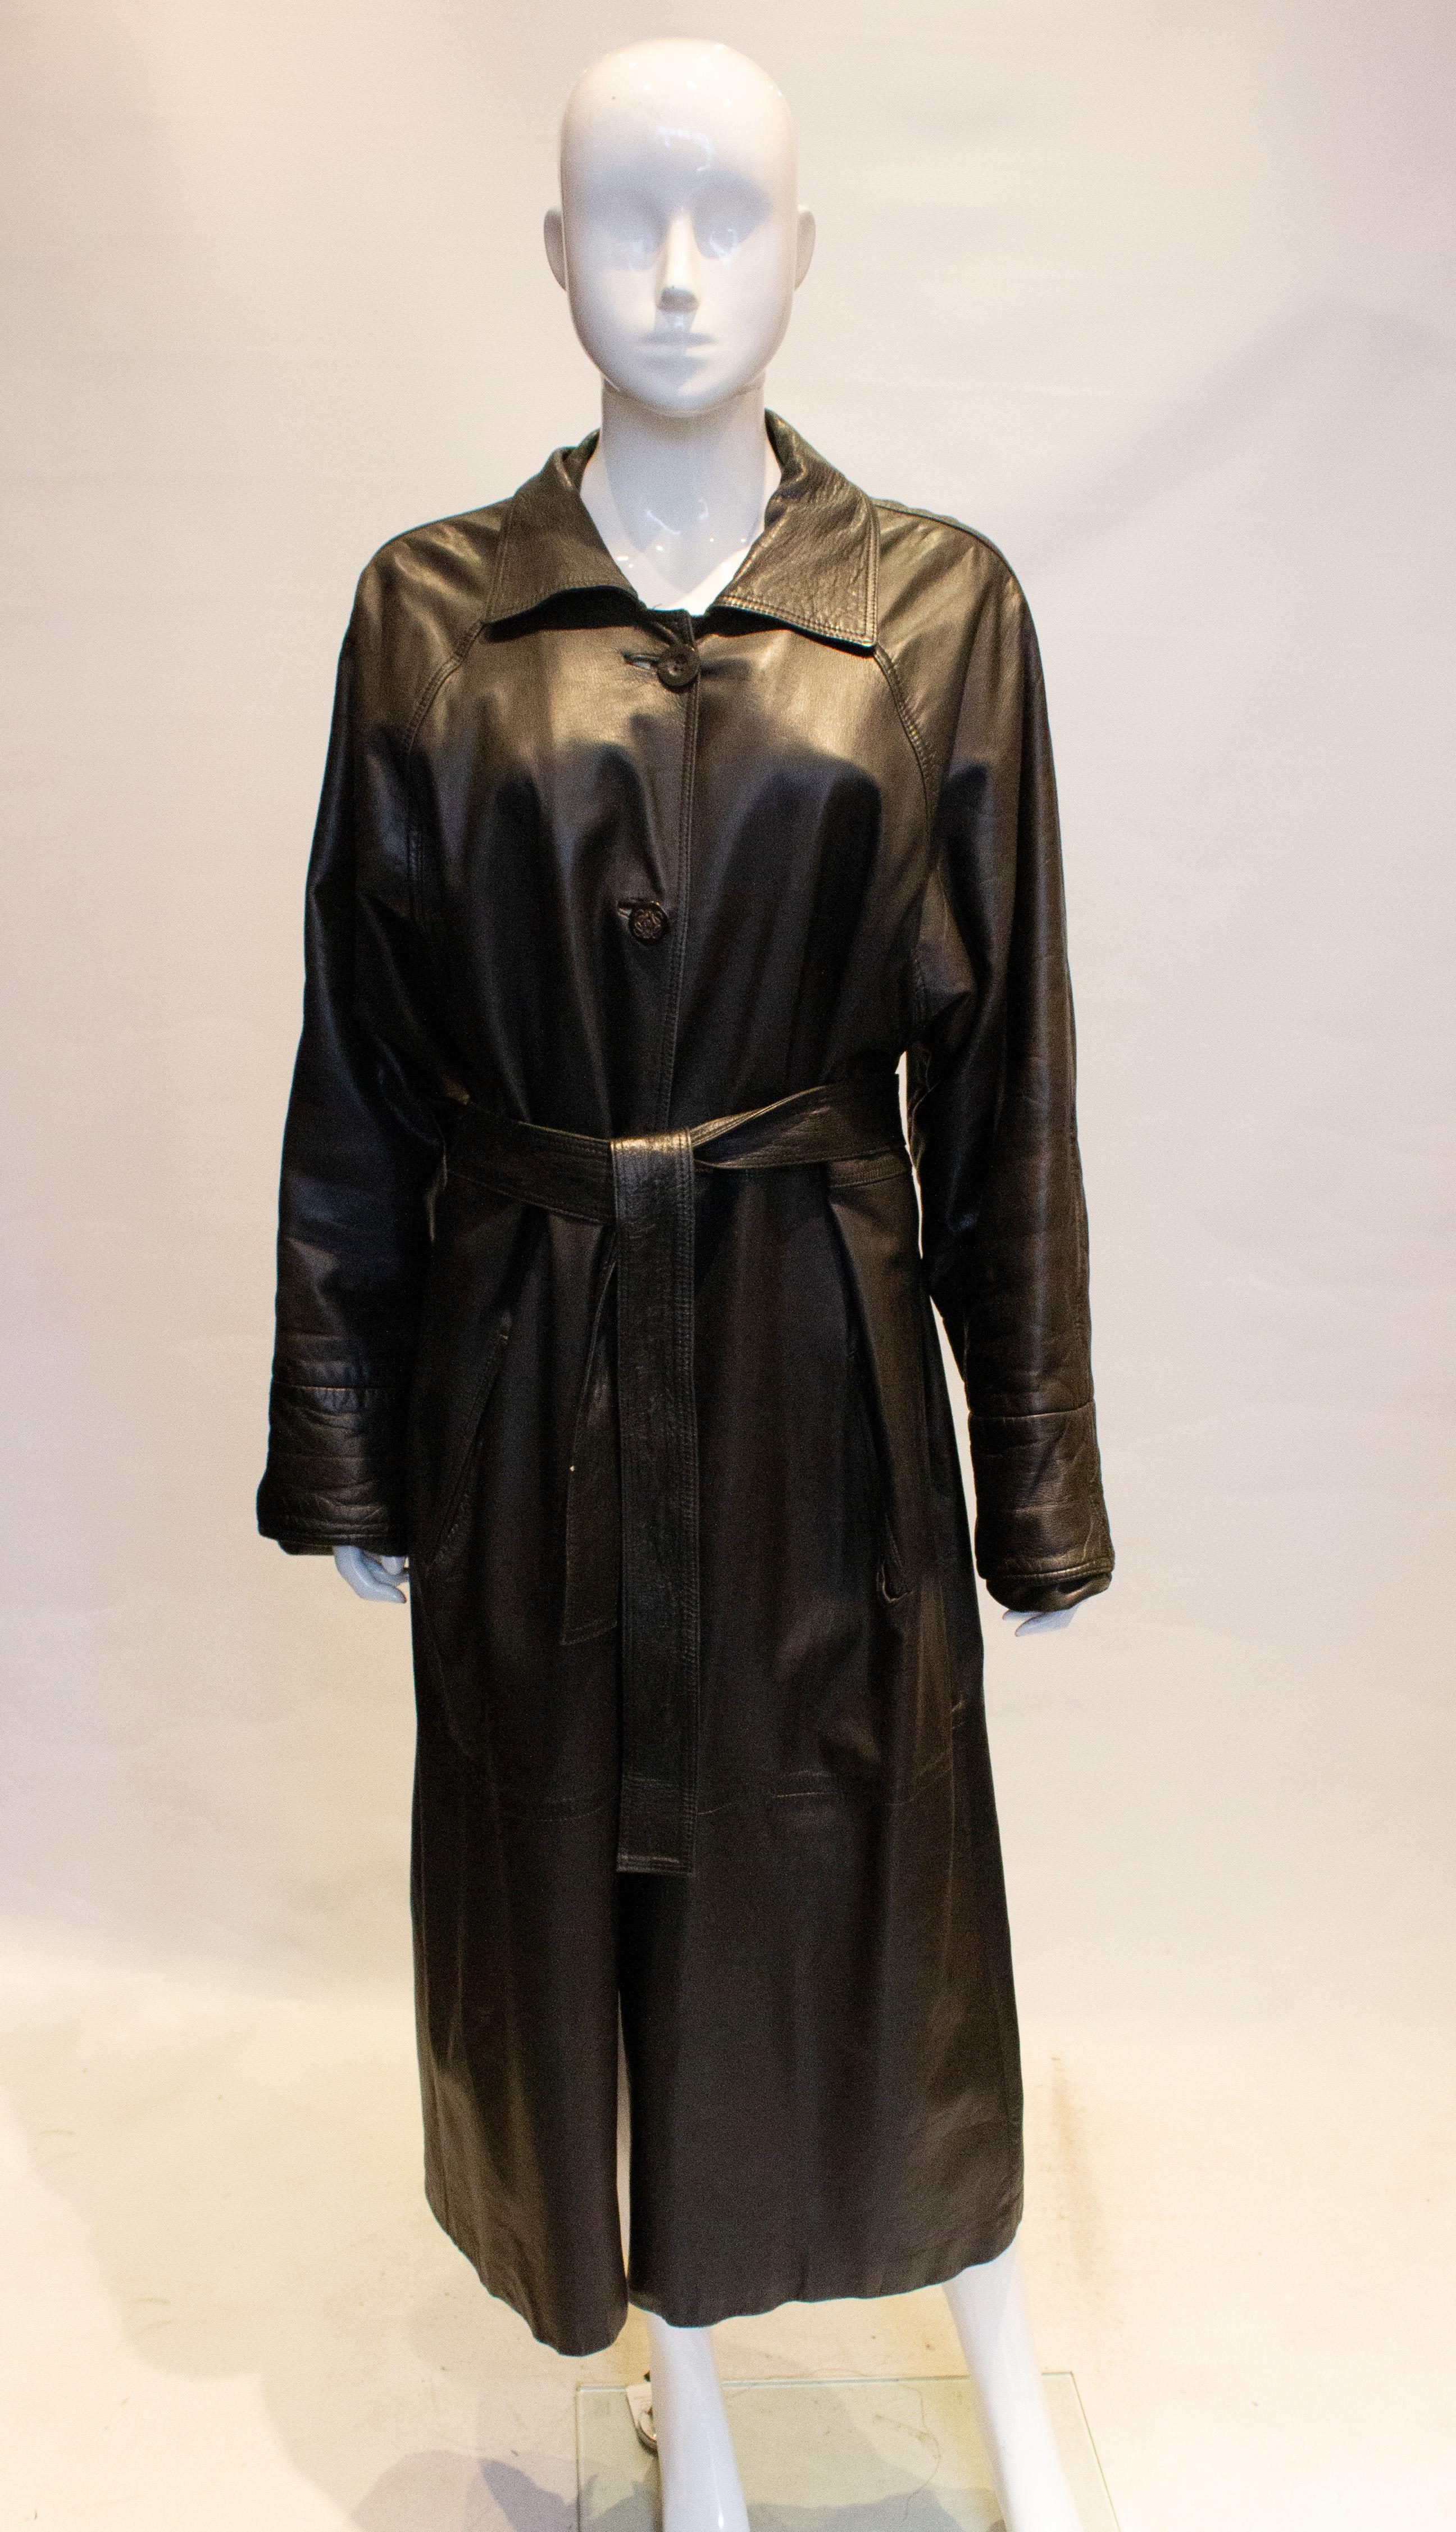 A head turning vintage black leather coat by Loewe. This coat is in super soft leather as you would expect from Loewe. It has a front button opening with internal button holes for a liner. It has two pockets, a back vent and matching belt.
The top